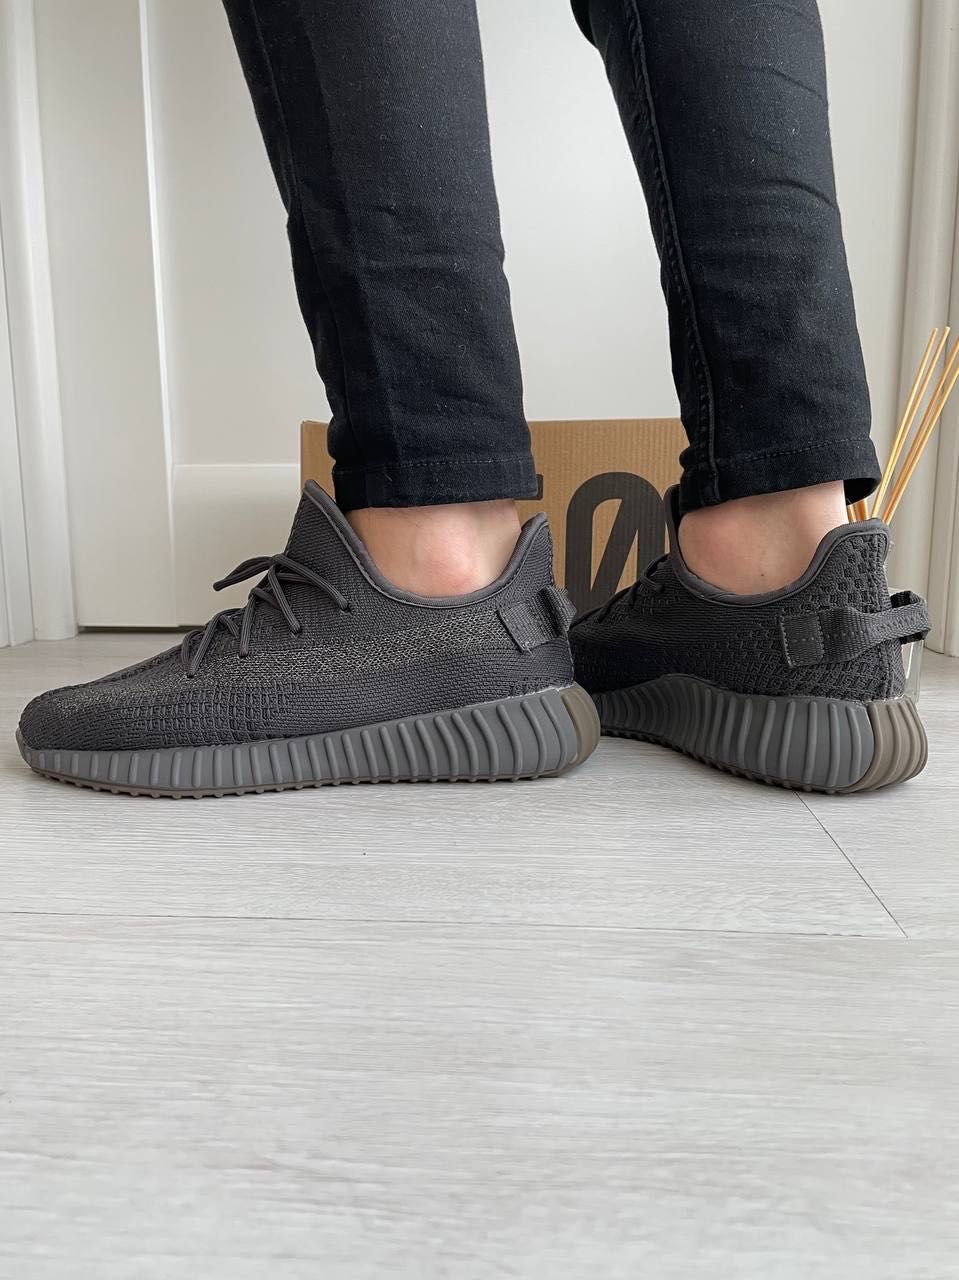 Кроссовки Adidas Yeezy Boost 350 V2 made in India